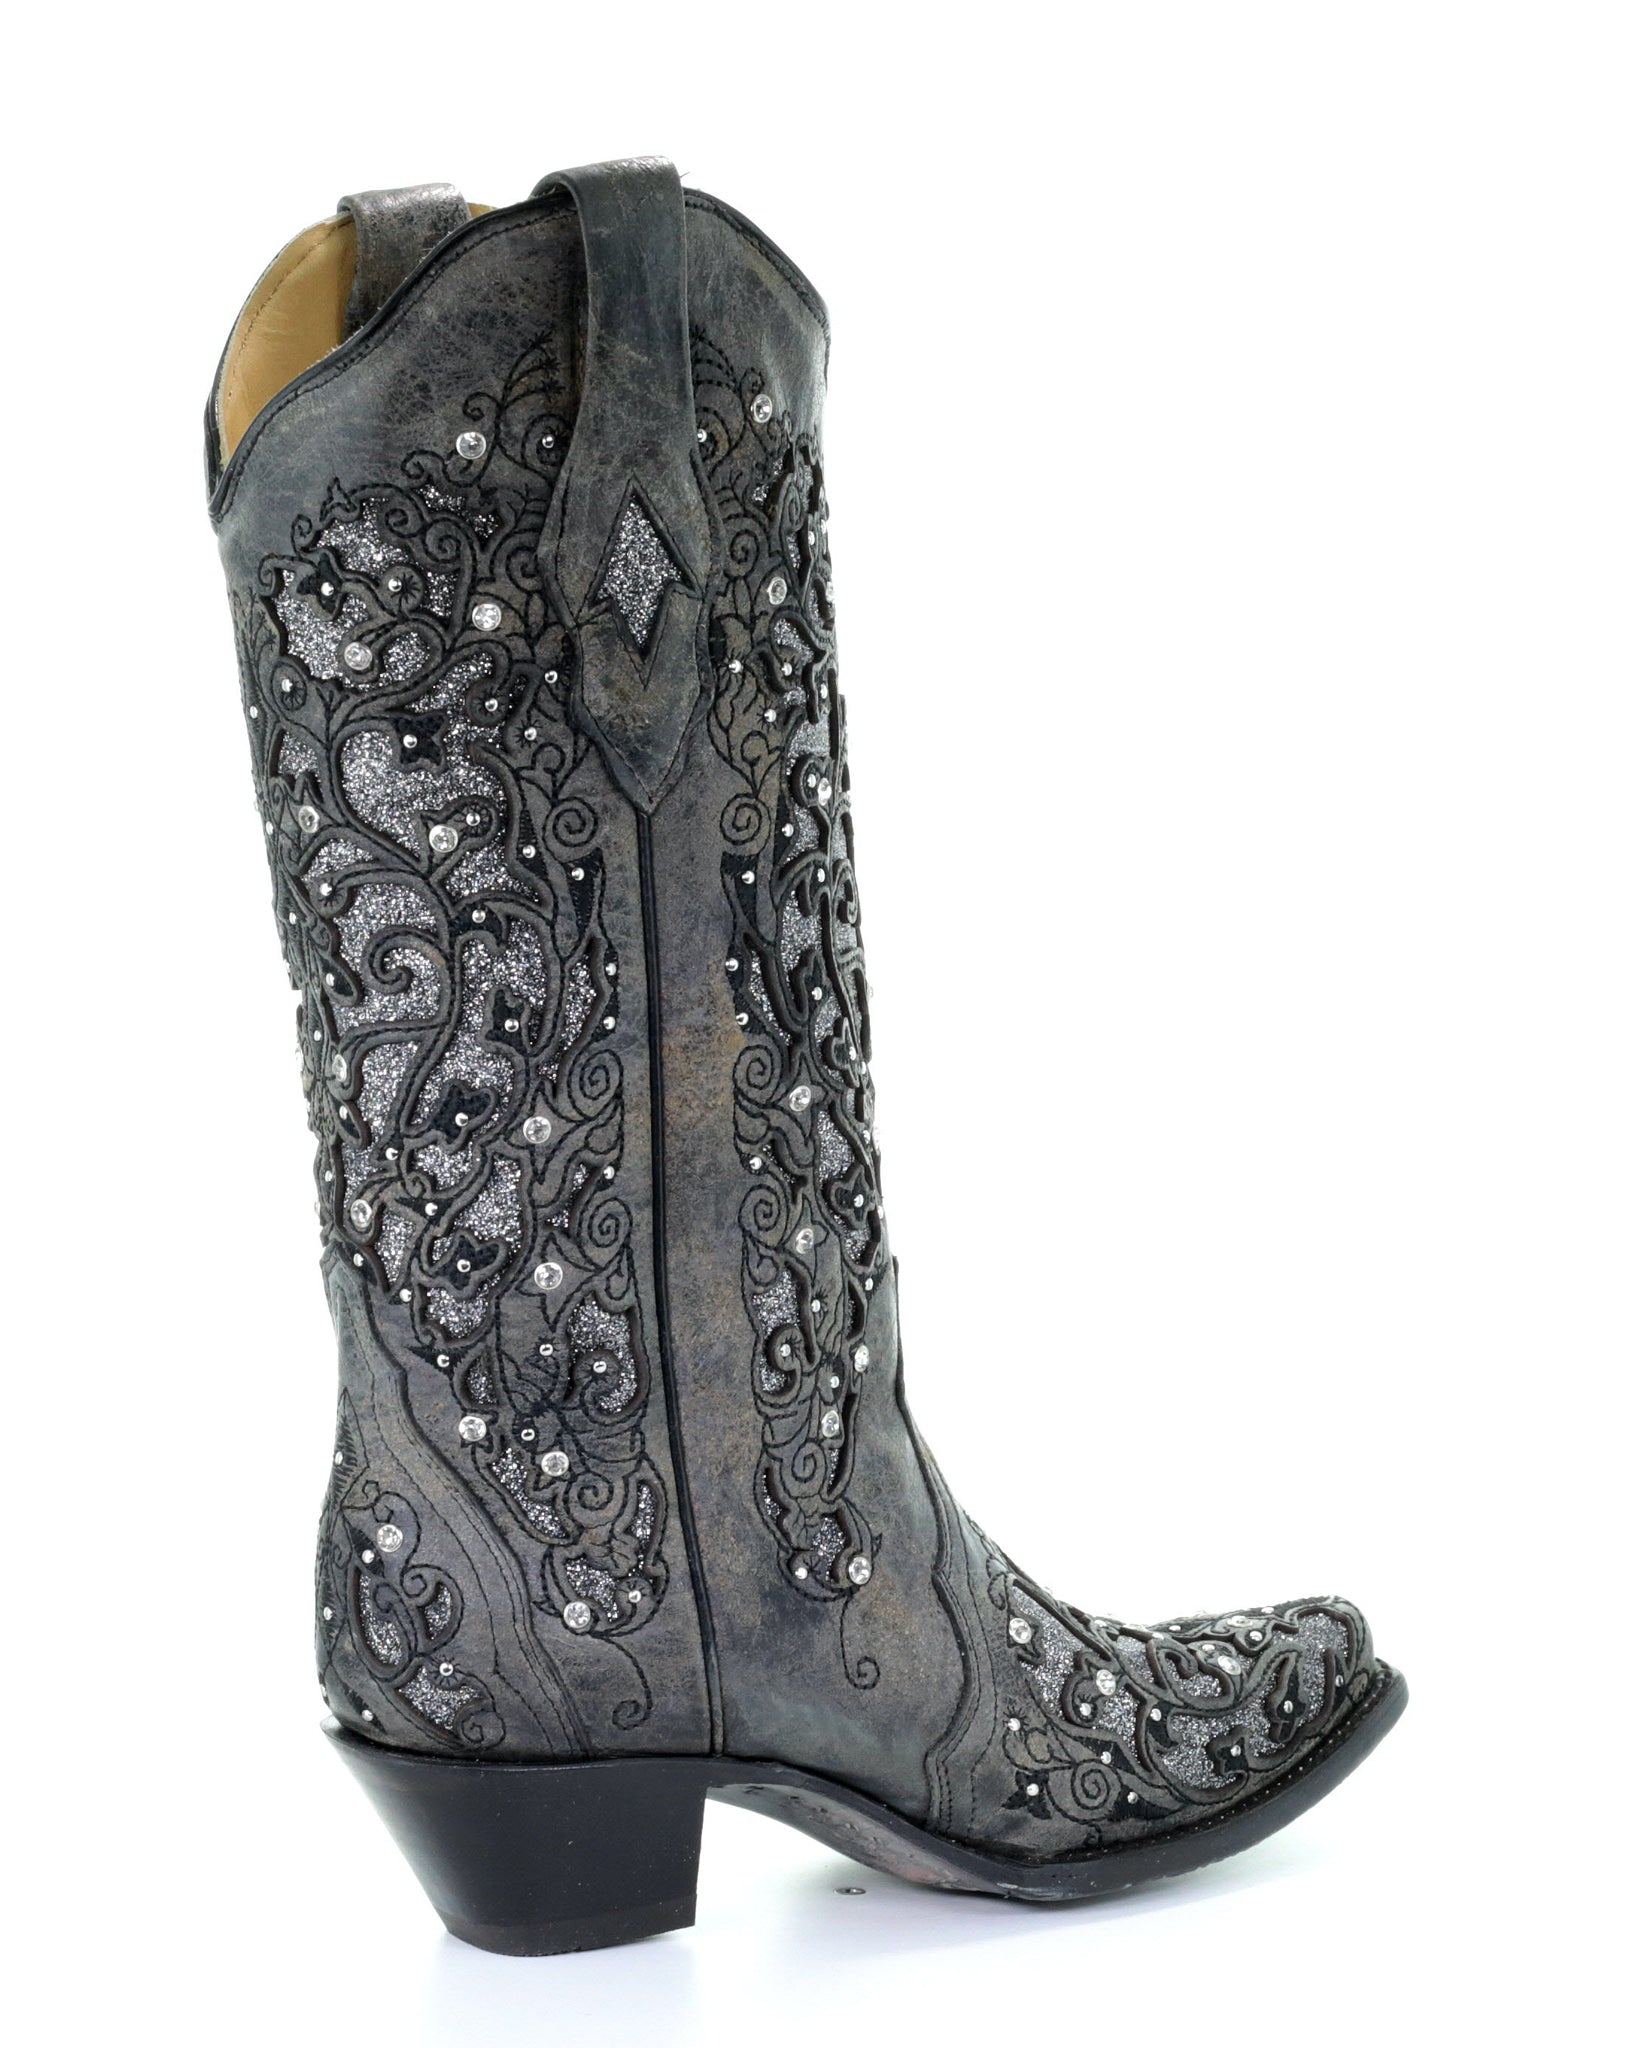 Women's Glitter and Crystals Boots – Skip's Western Outfitters